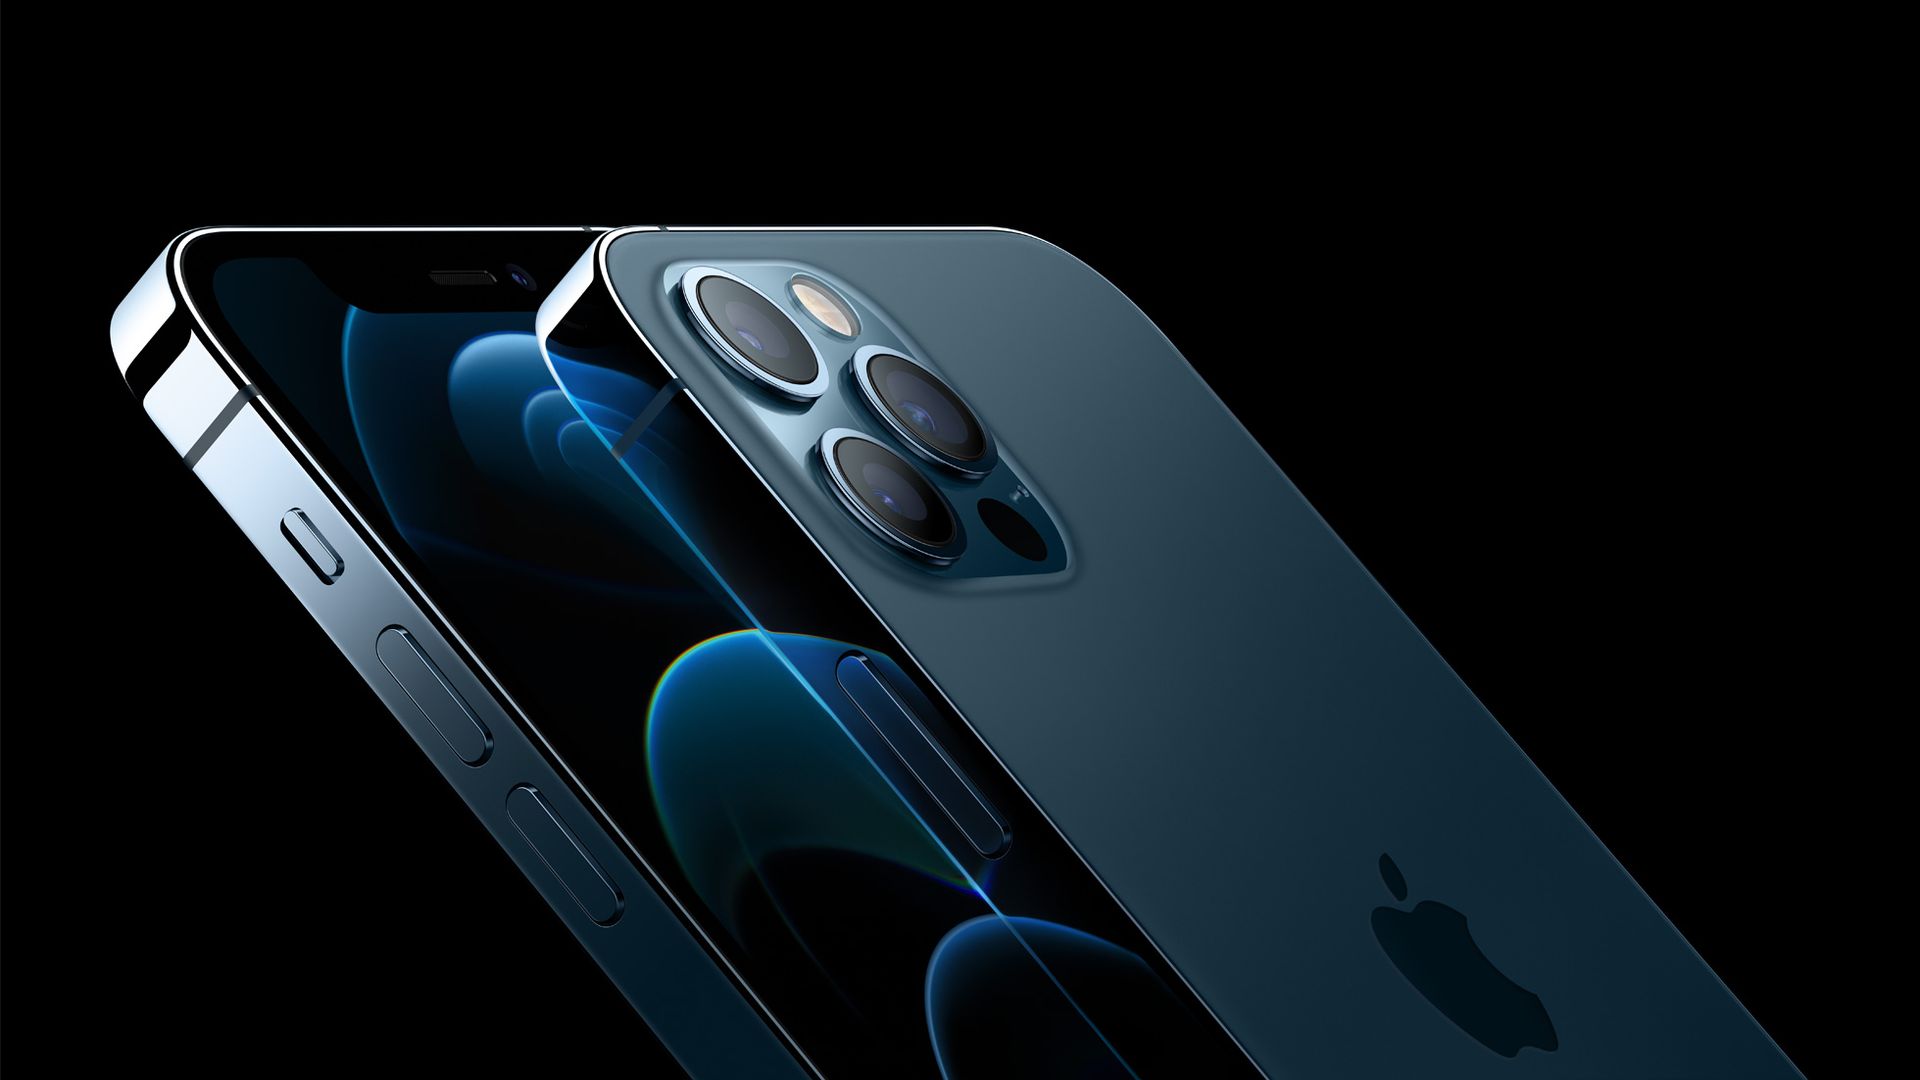 The iPhone 12 Pro features both 5G support as well as a LiDAR sensor